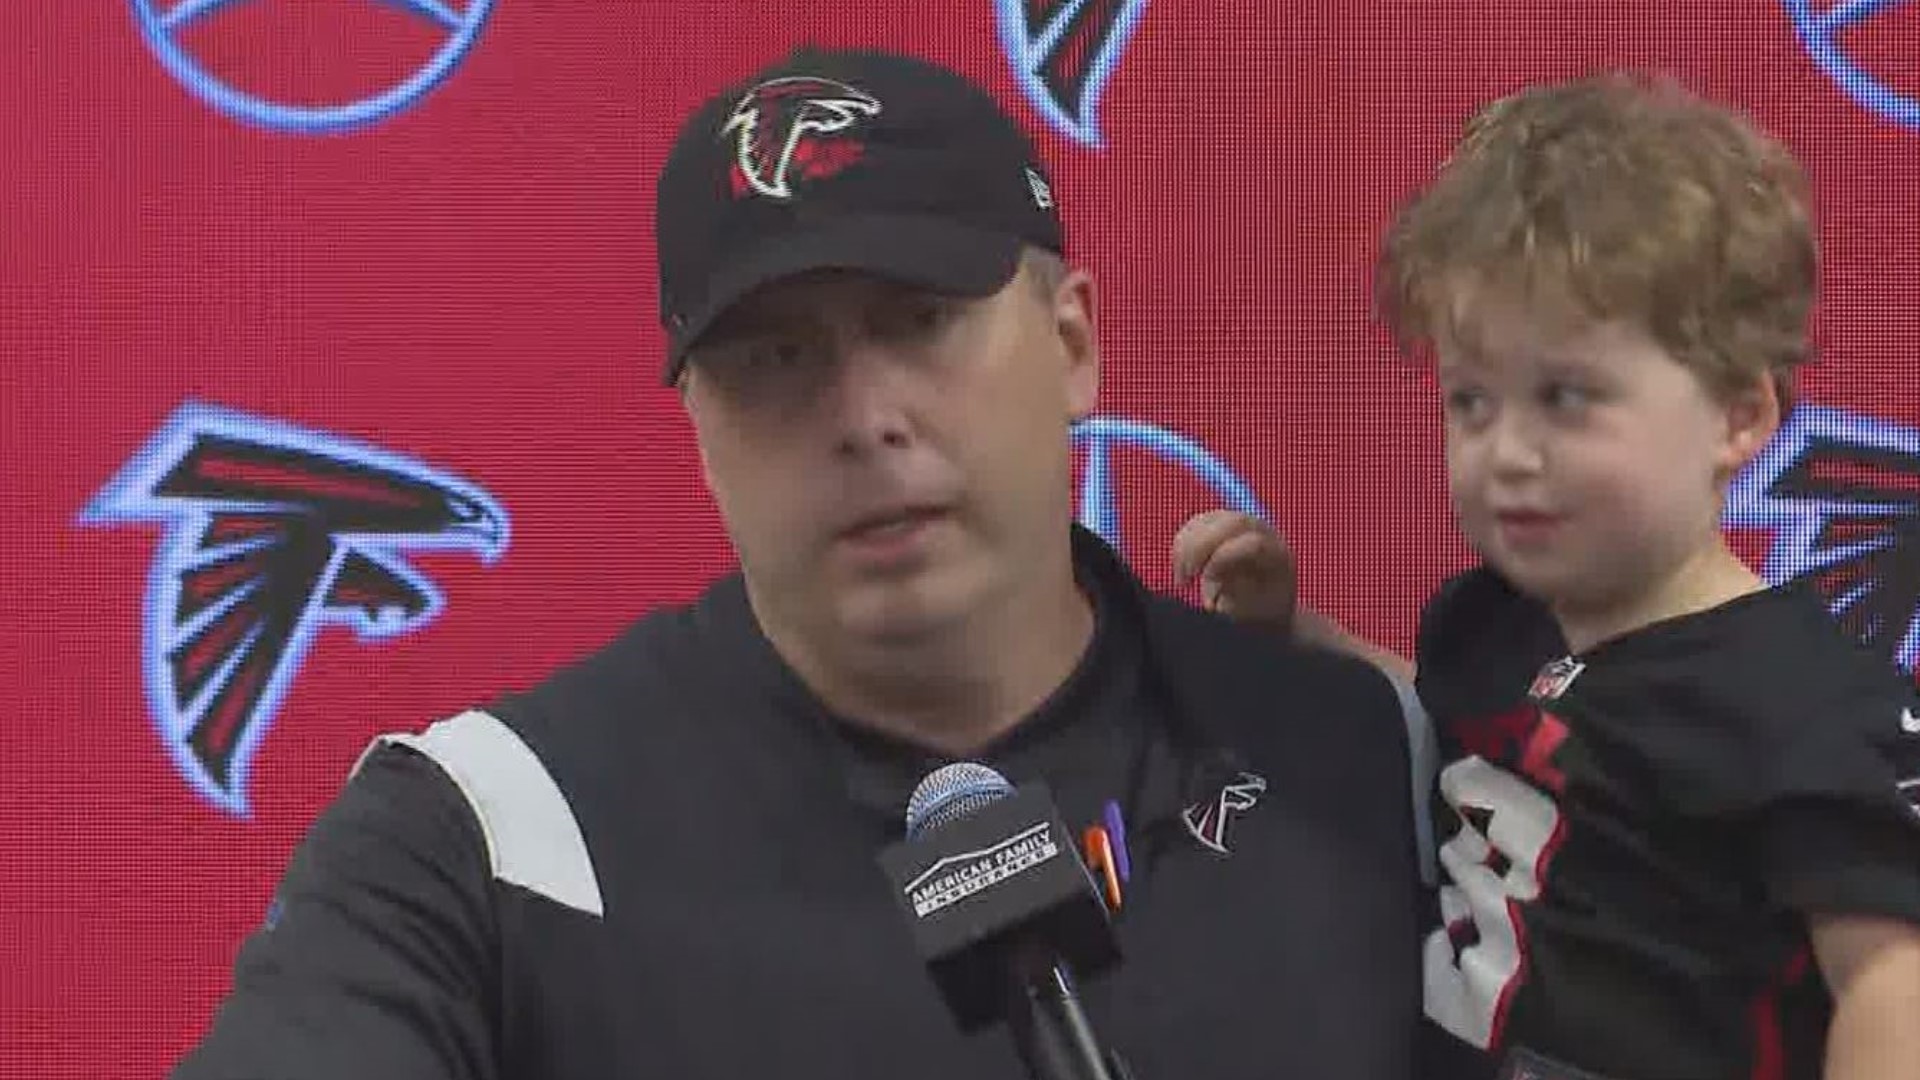 After the Falcons' final preseason game against the Jacksonville Jaguars, Coach Arthur Smith had a cute fan waiting for him during the post-game.